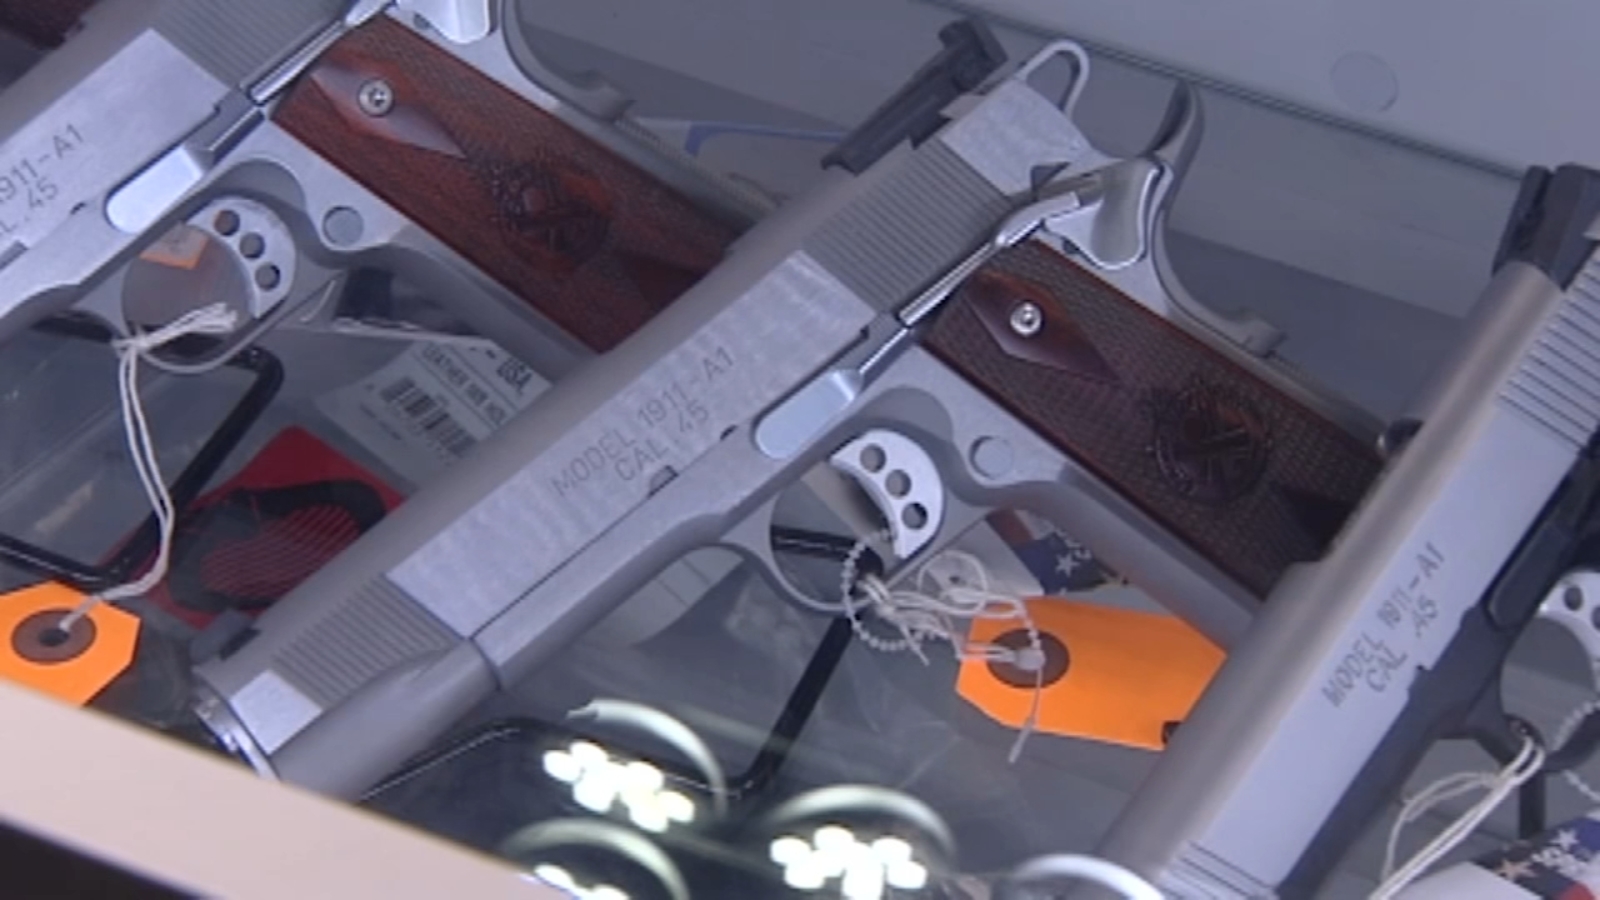 Supreme Court hears arguments in major gun rights case after more than